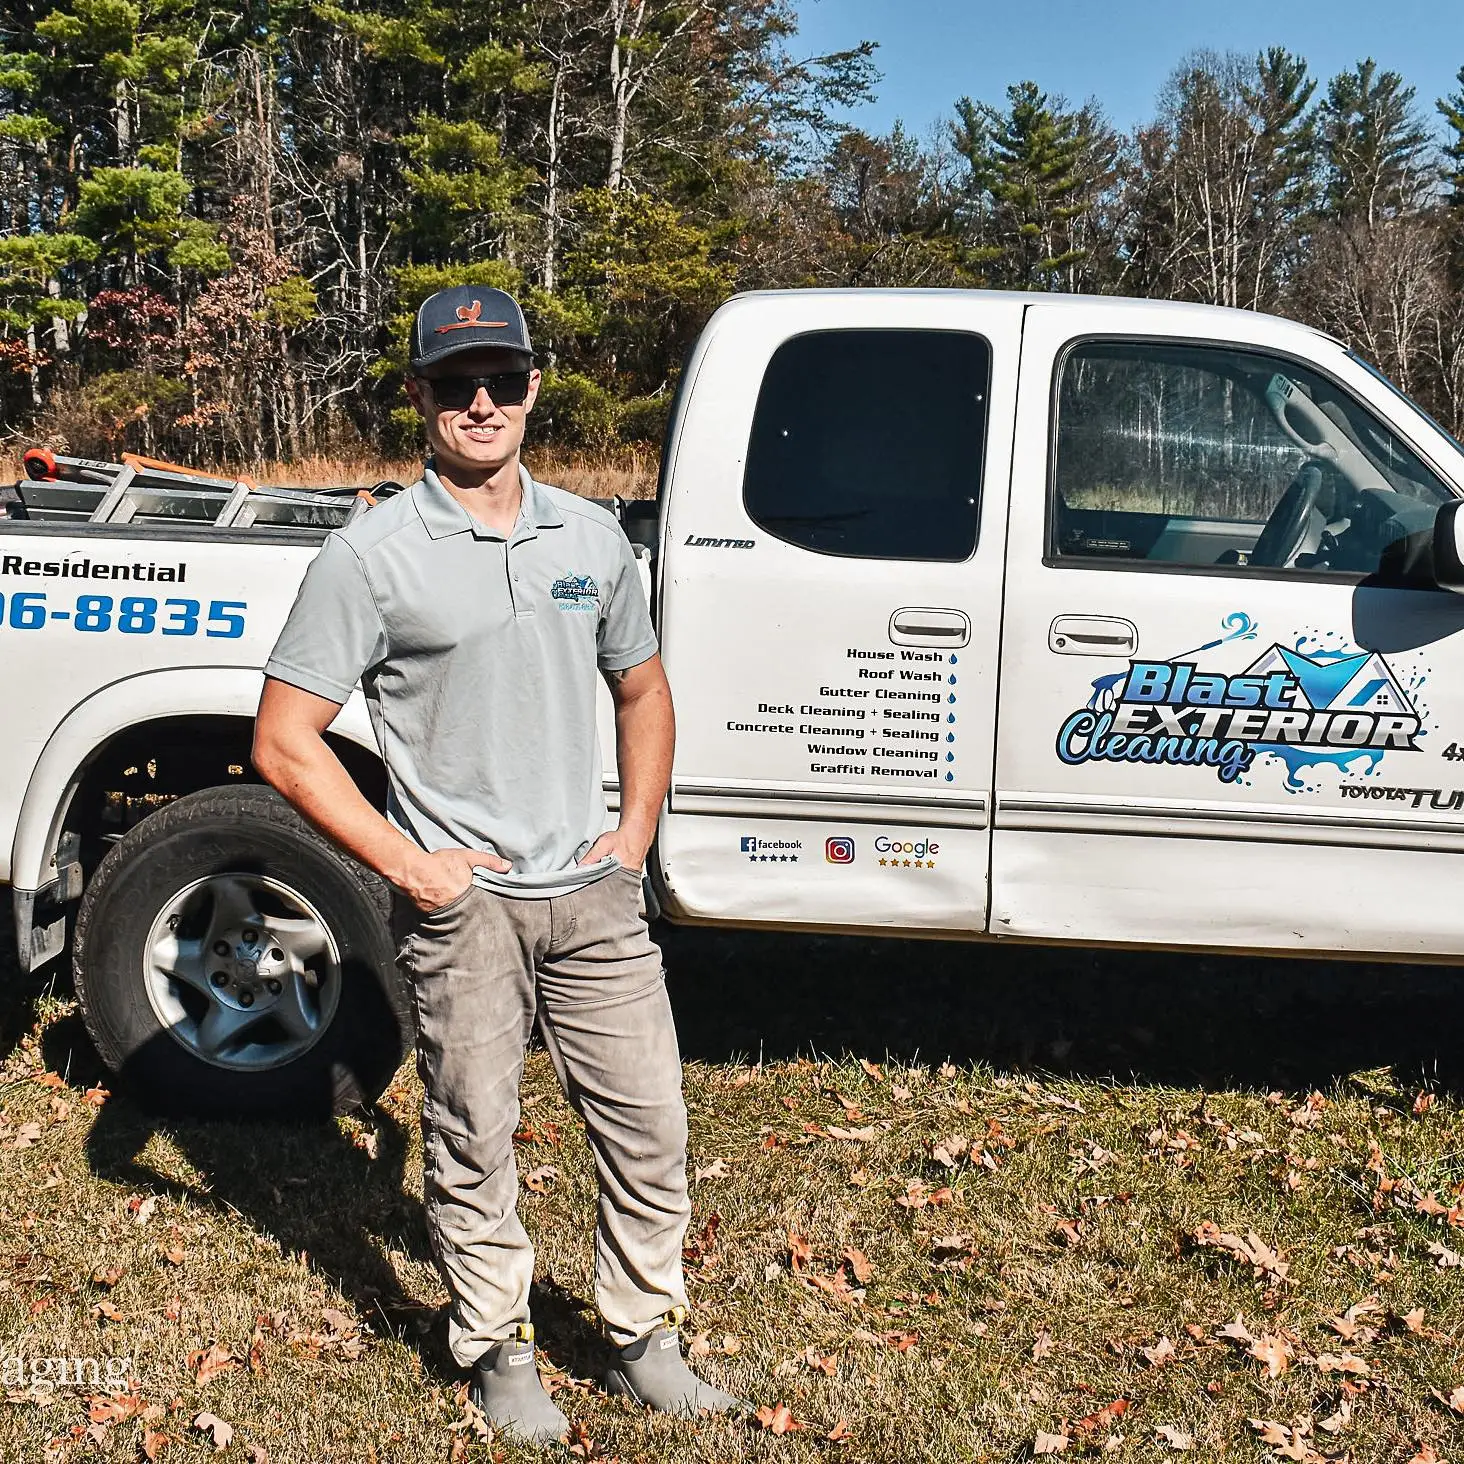 Hunter Rogers owner of Blast Exterior Cleaning is standing in front of his work truck